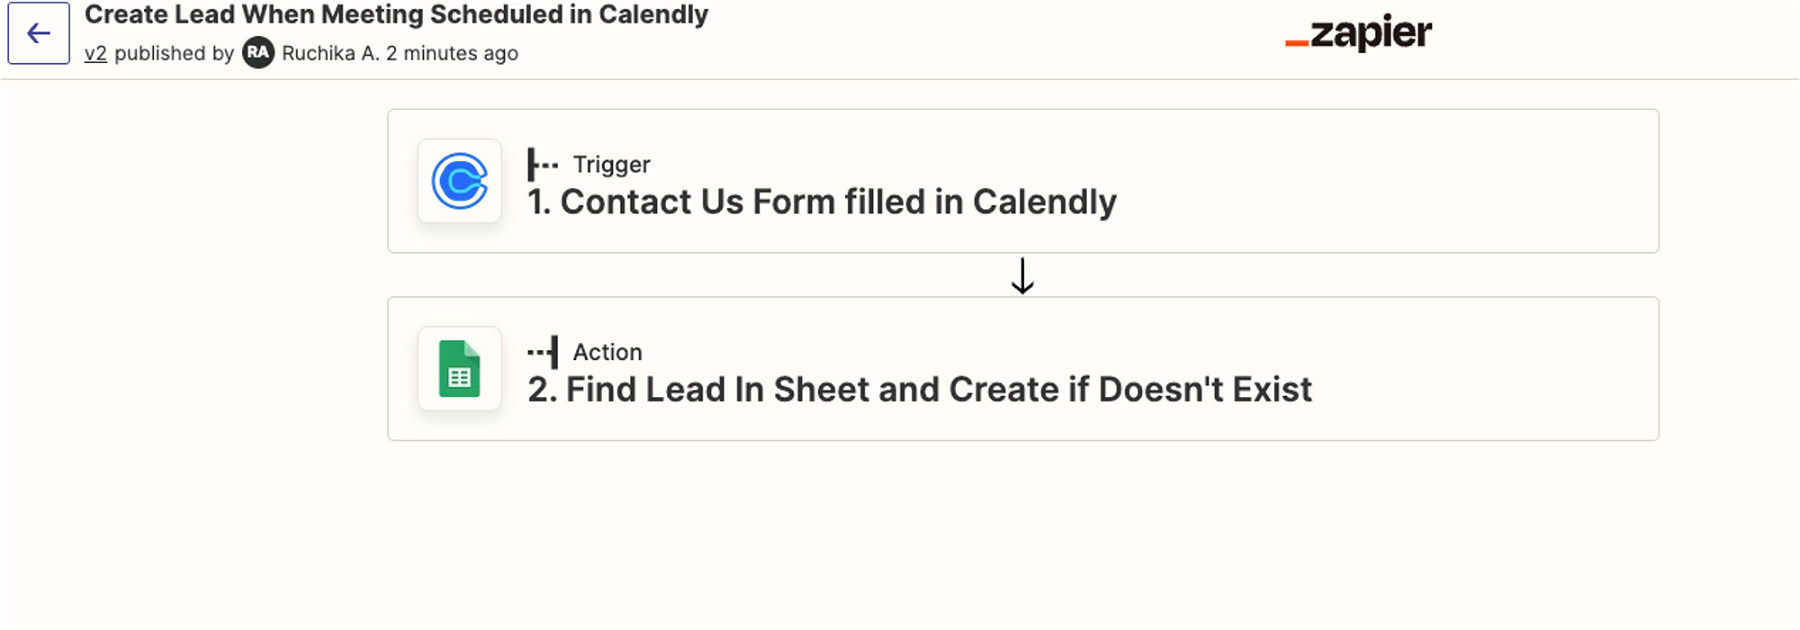 Zap to create Lead in Google Sheets when Meeting is scheduled in Calendly